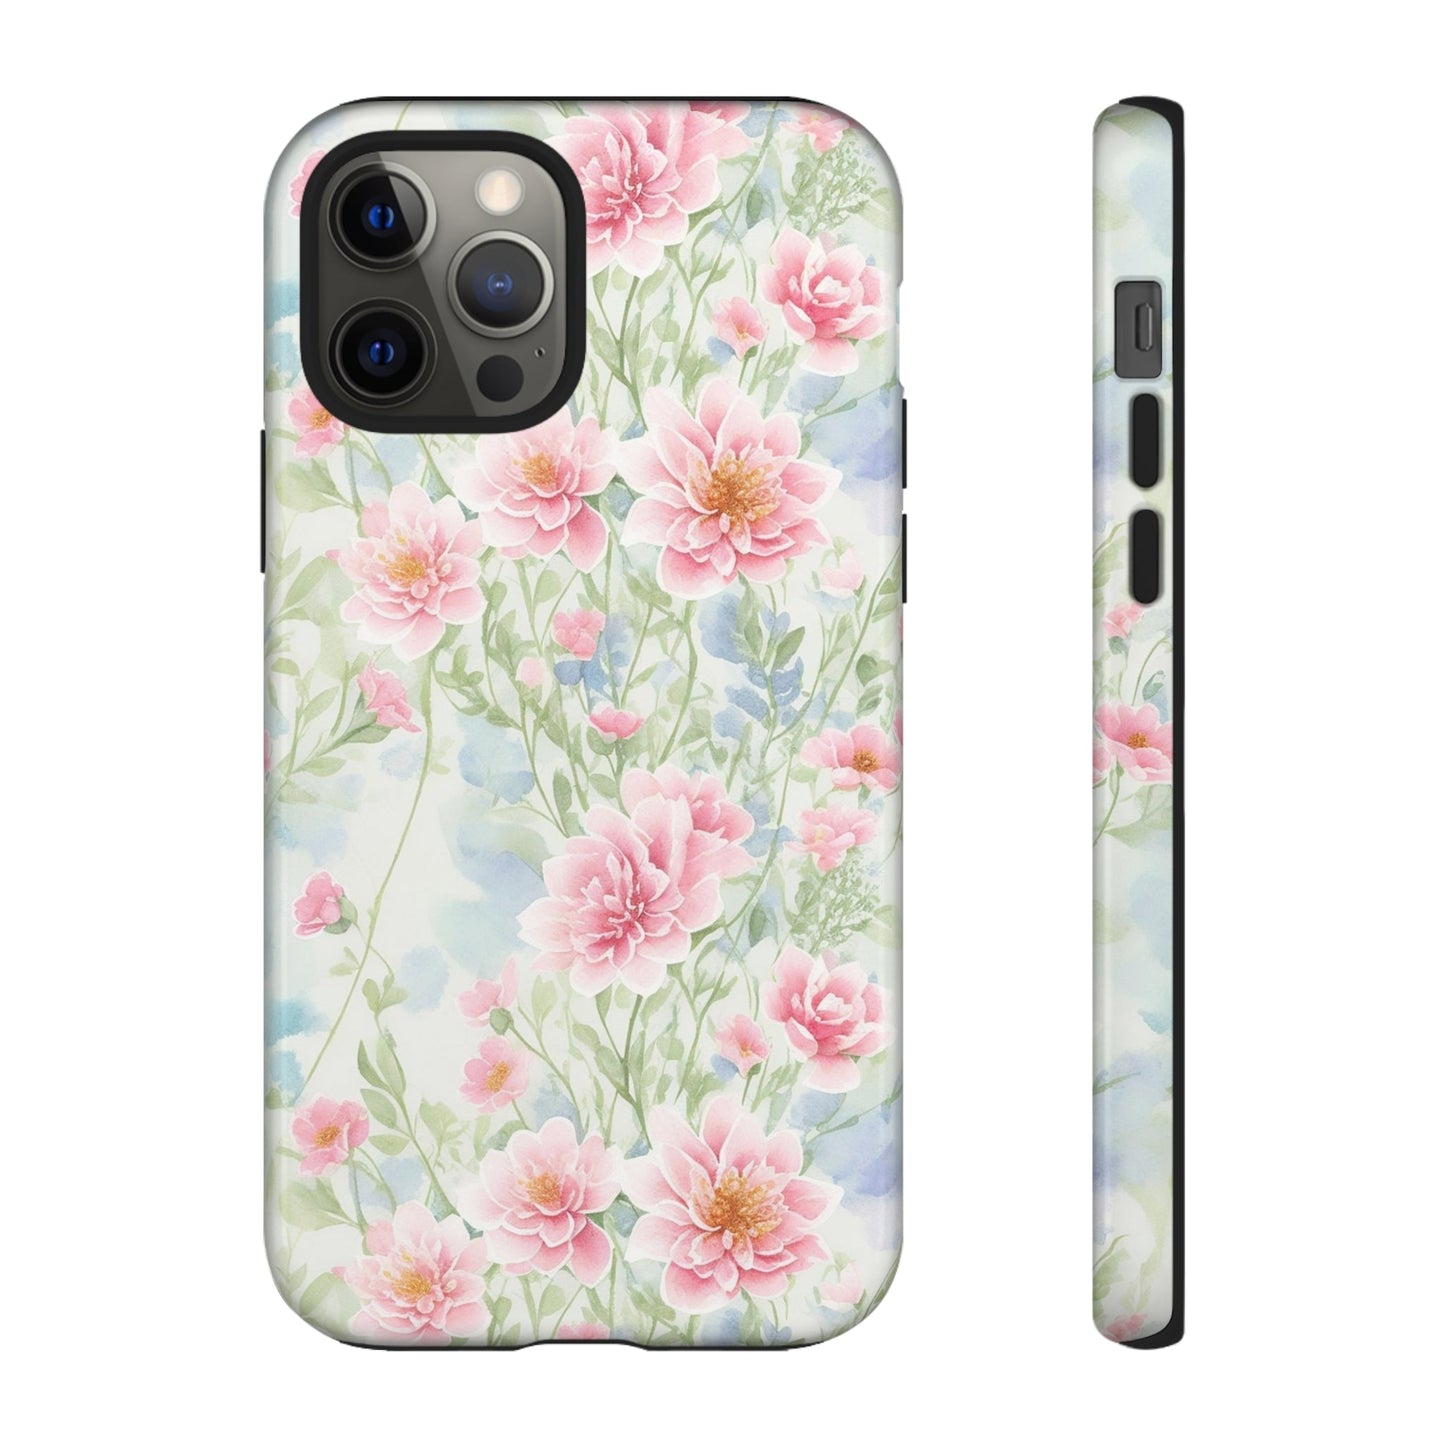 Phone case fits devices iPhone Samsung Galaxy Google Pixel - Stylish Phone Case - Cheerful Lane